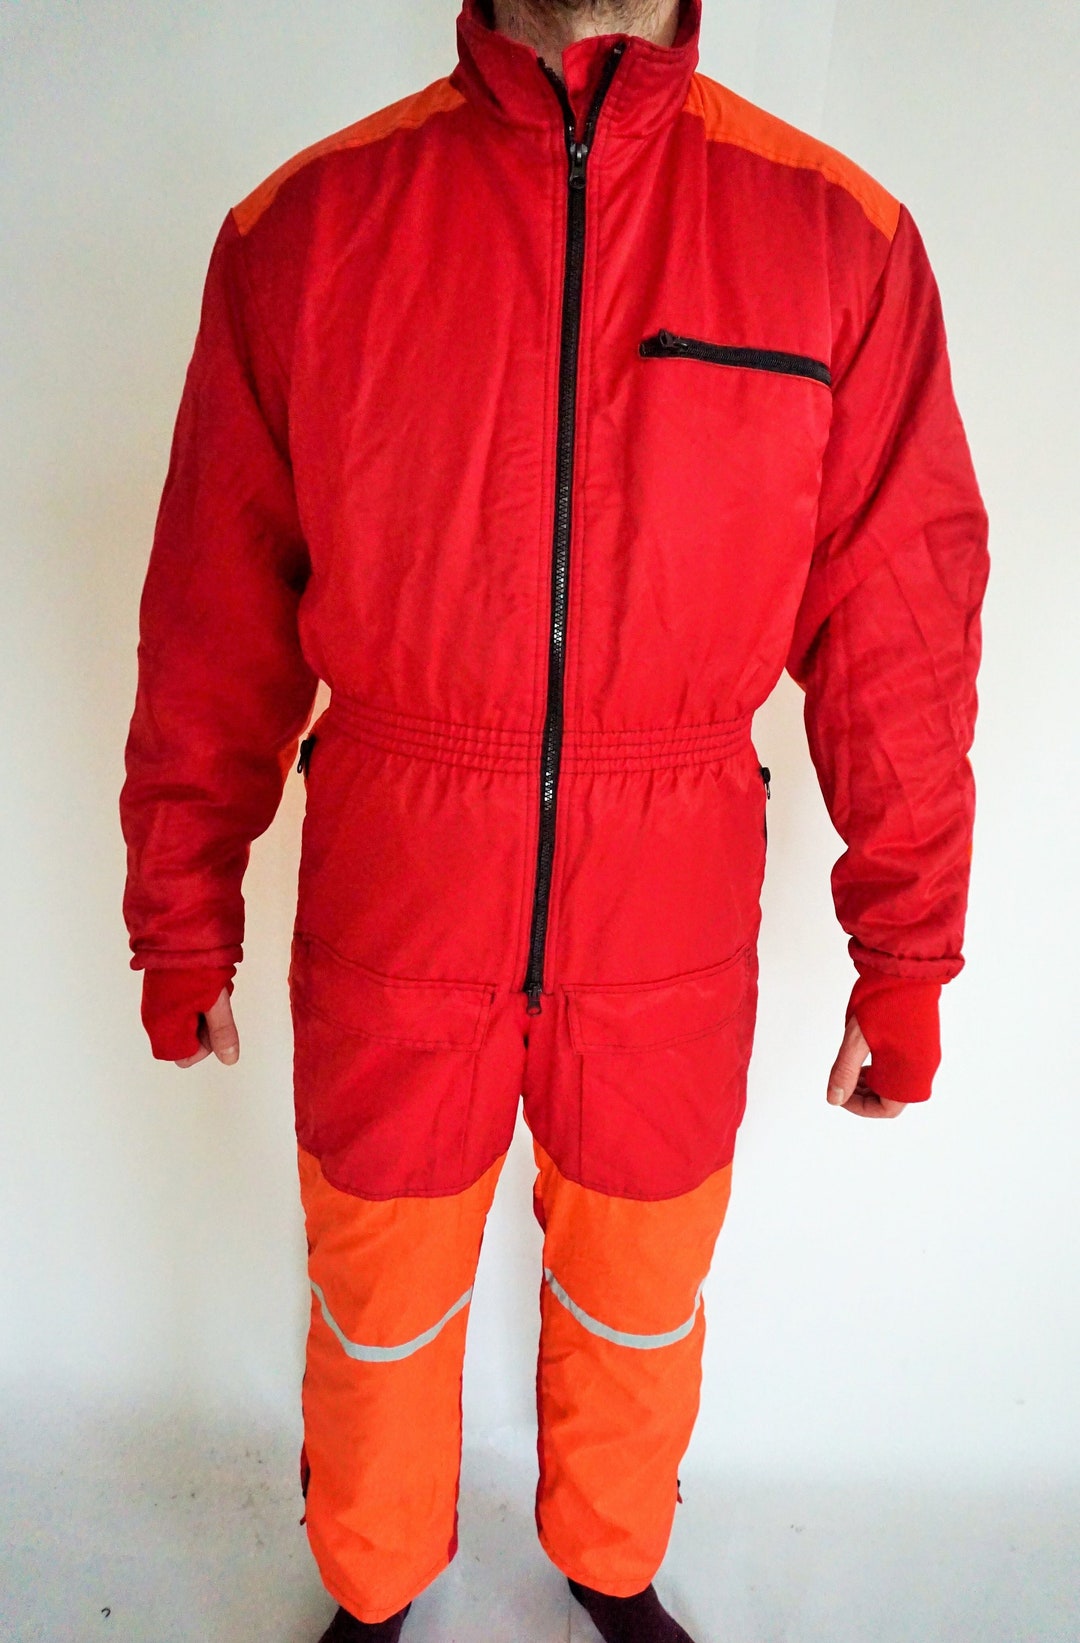 Vintage One Piece Skiing Suit / Lined / Ski Wear / Red / Skisuit ...